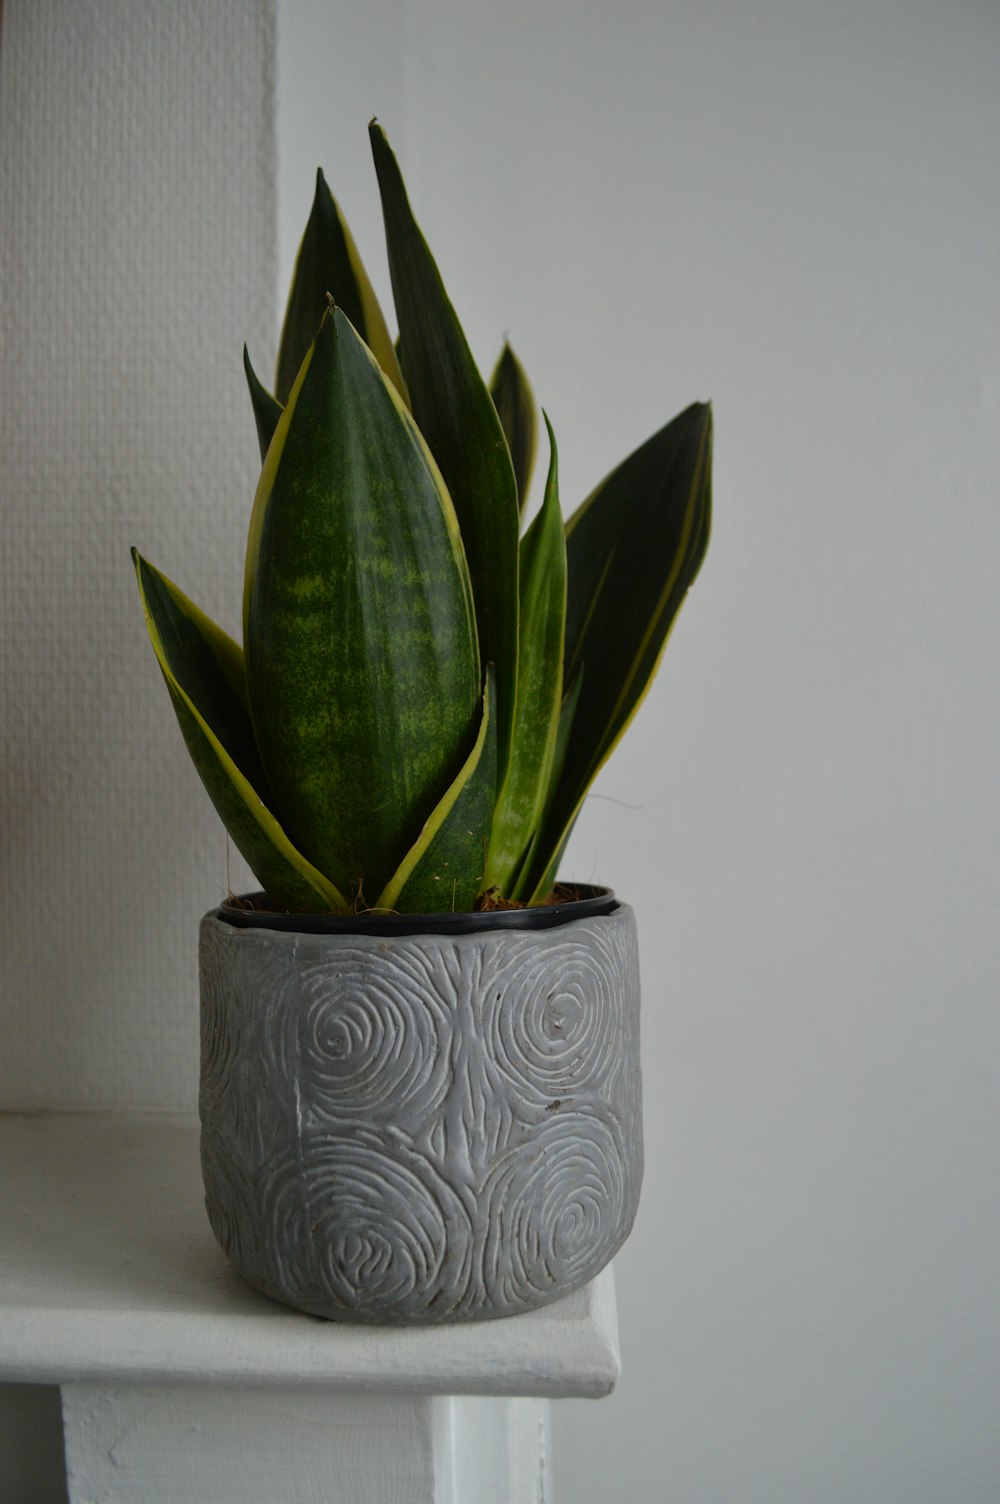 green plant on white and blue floral ceramic pot